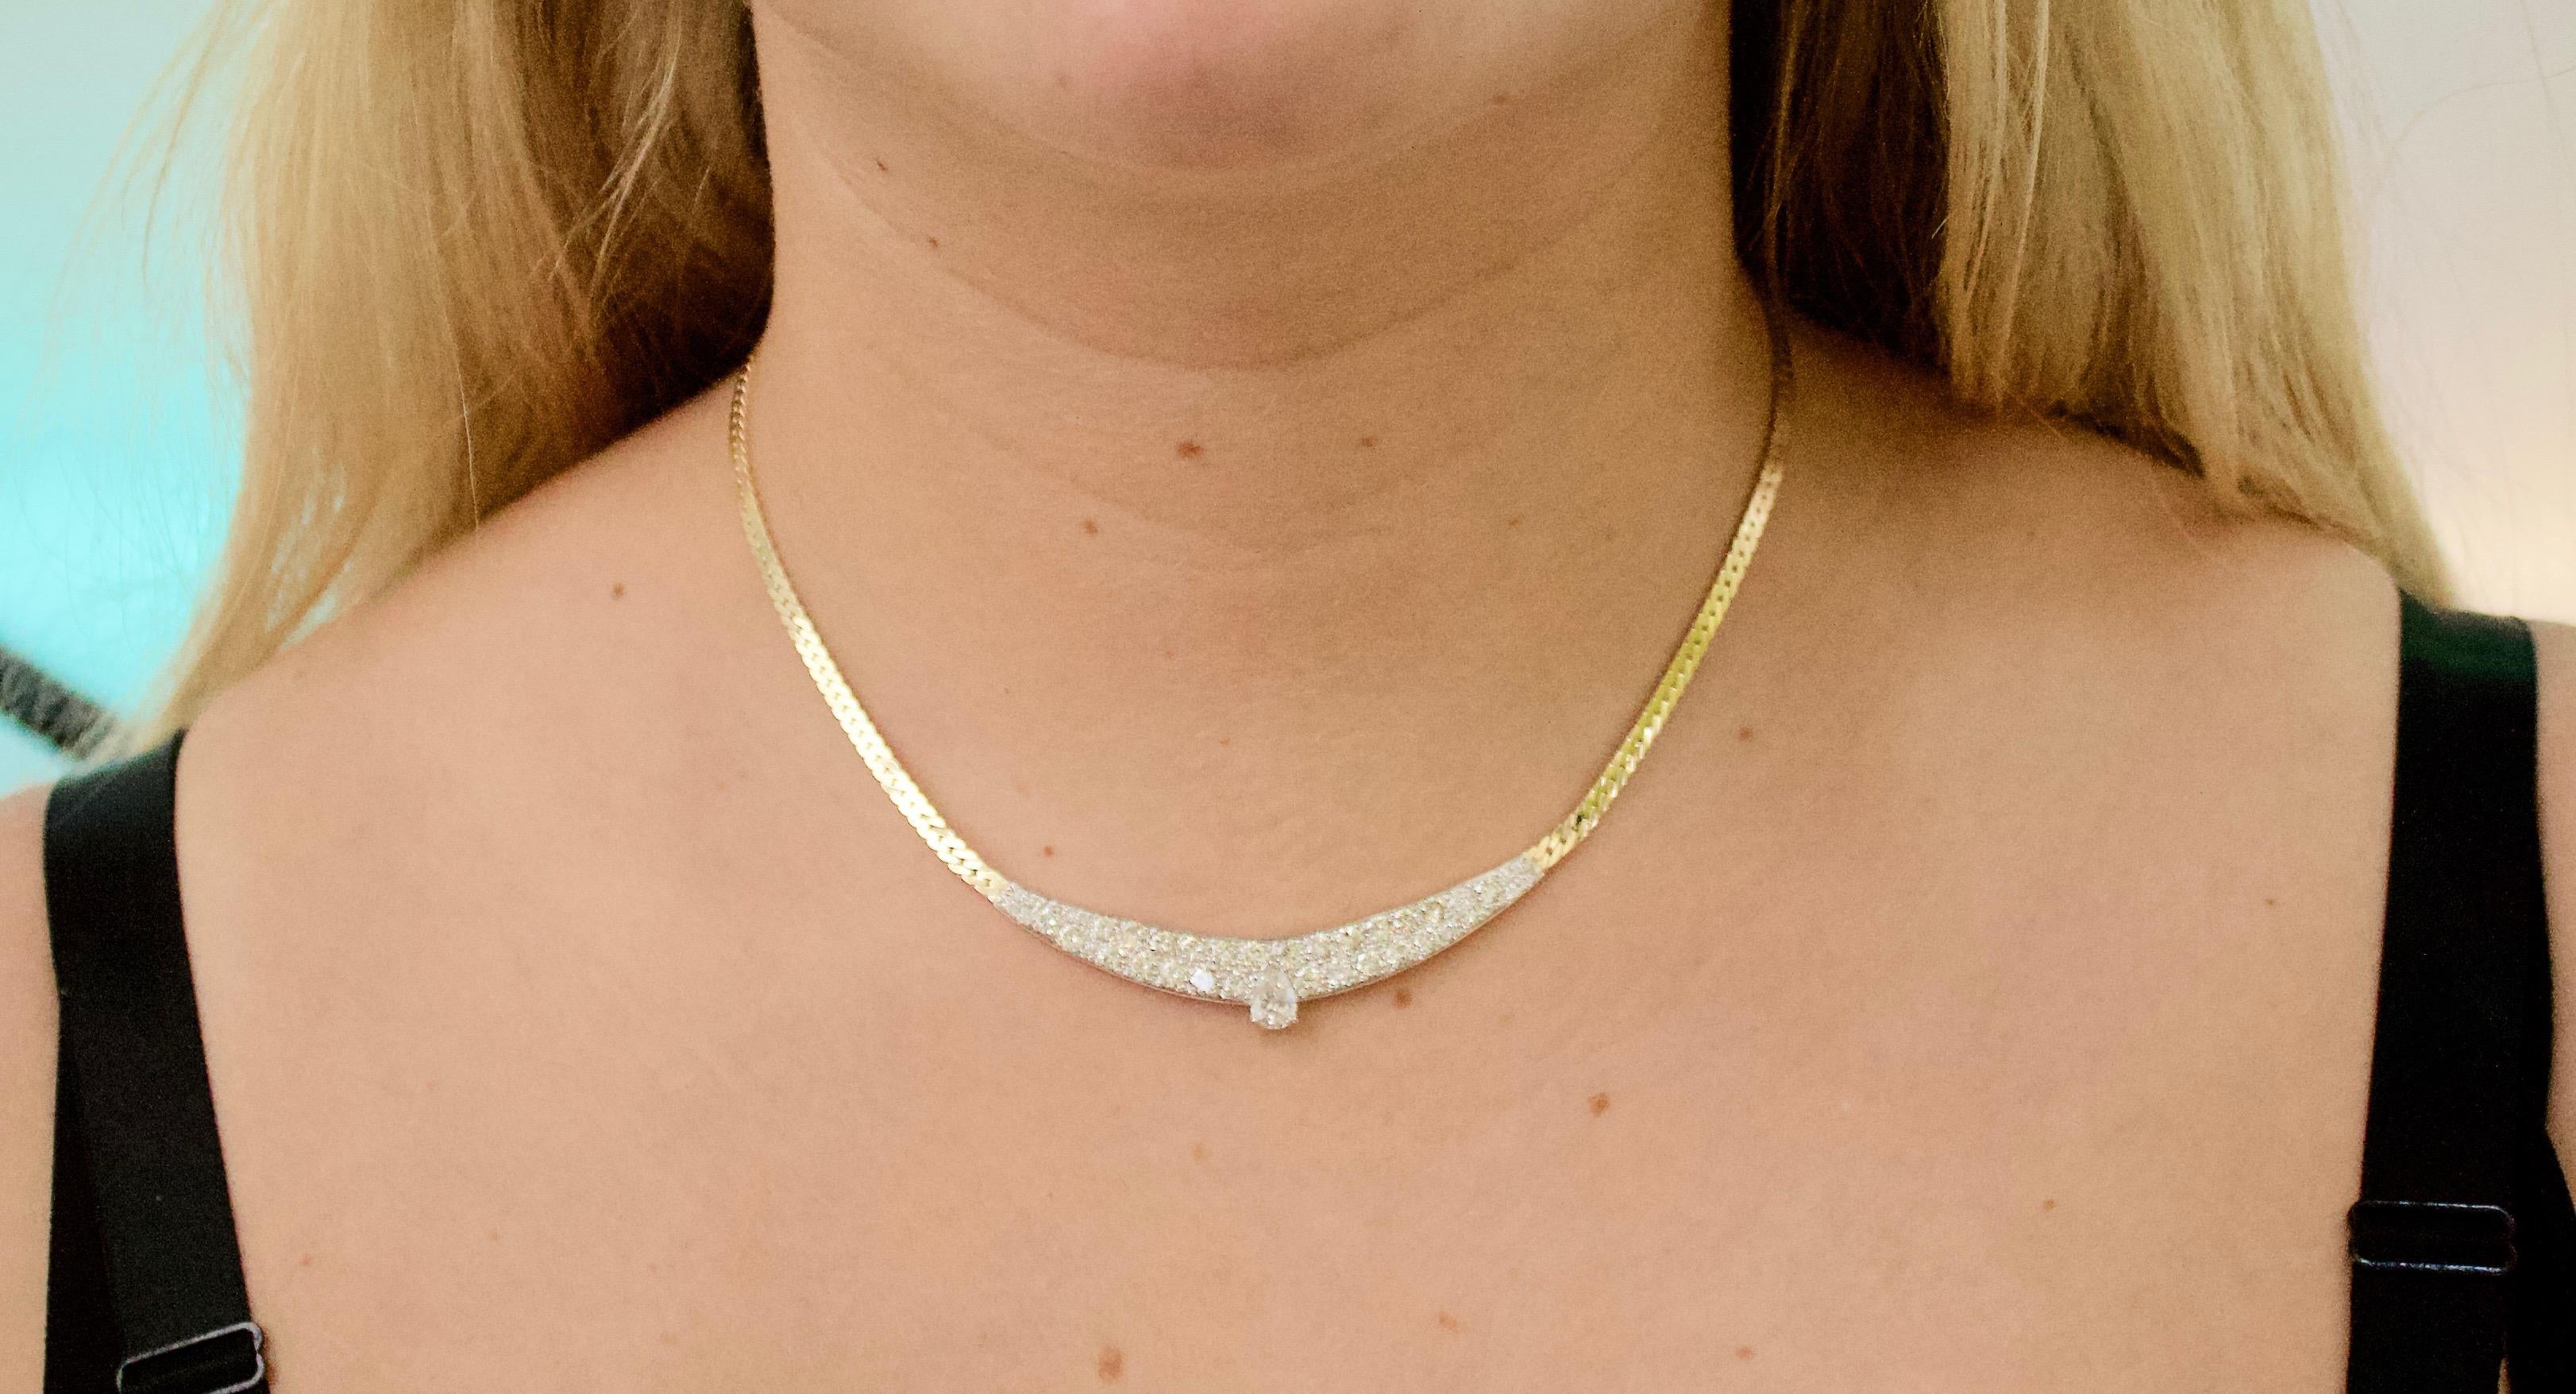 Classic Diamond Necklace in White and Yellow Gold Circa 1960's 3.55 Total Carats
One Pair Shape Cut Diamond Weighing .60 Carats Approximately [GHI- SI3] [bright with no imperfections visible to the naked eye]
40 Round Brilliant Cut Diamonds Weighing